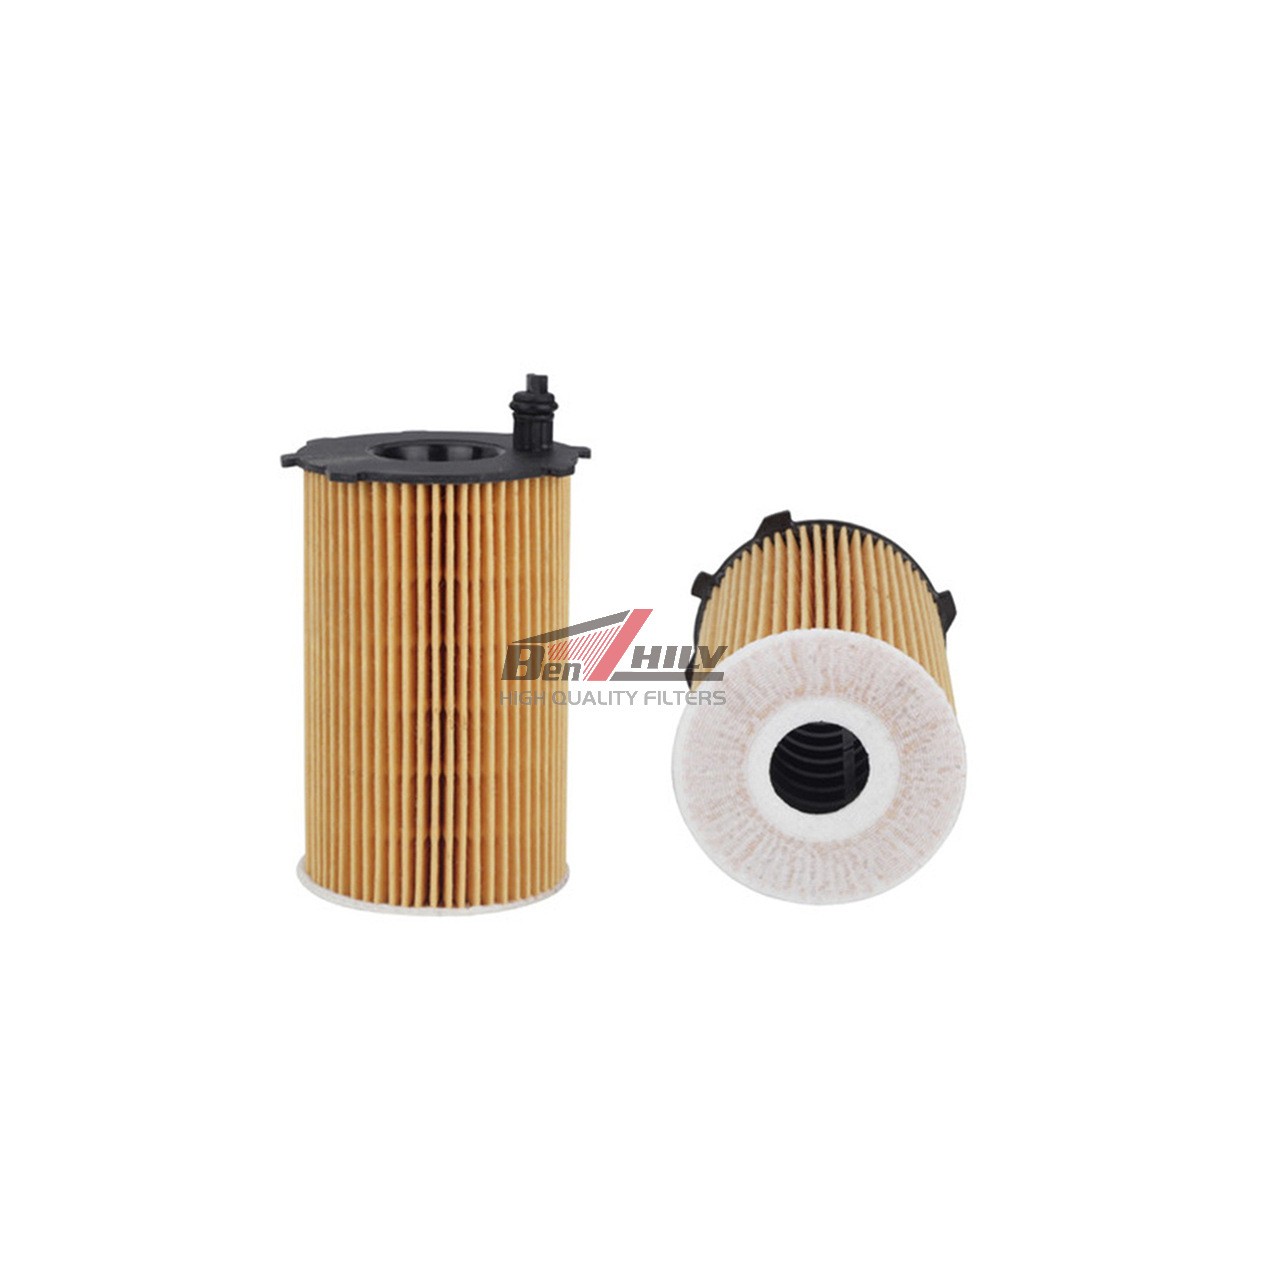 26320-3CAA0 Lubricate ang oil filter element